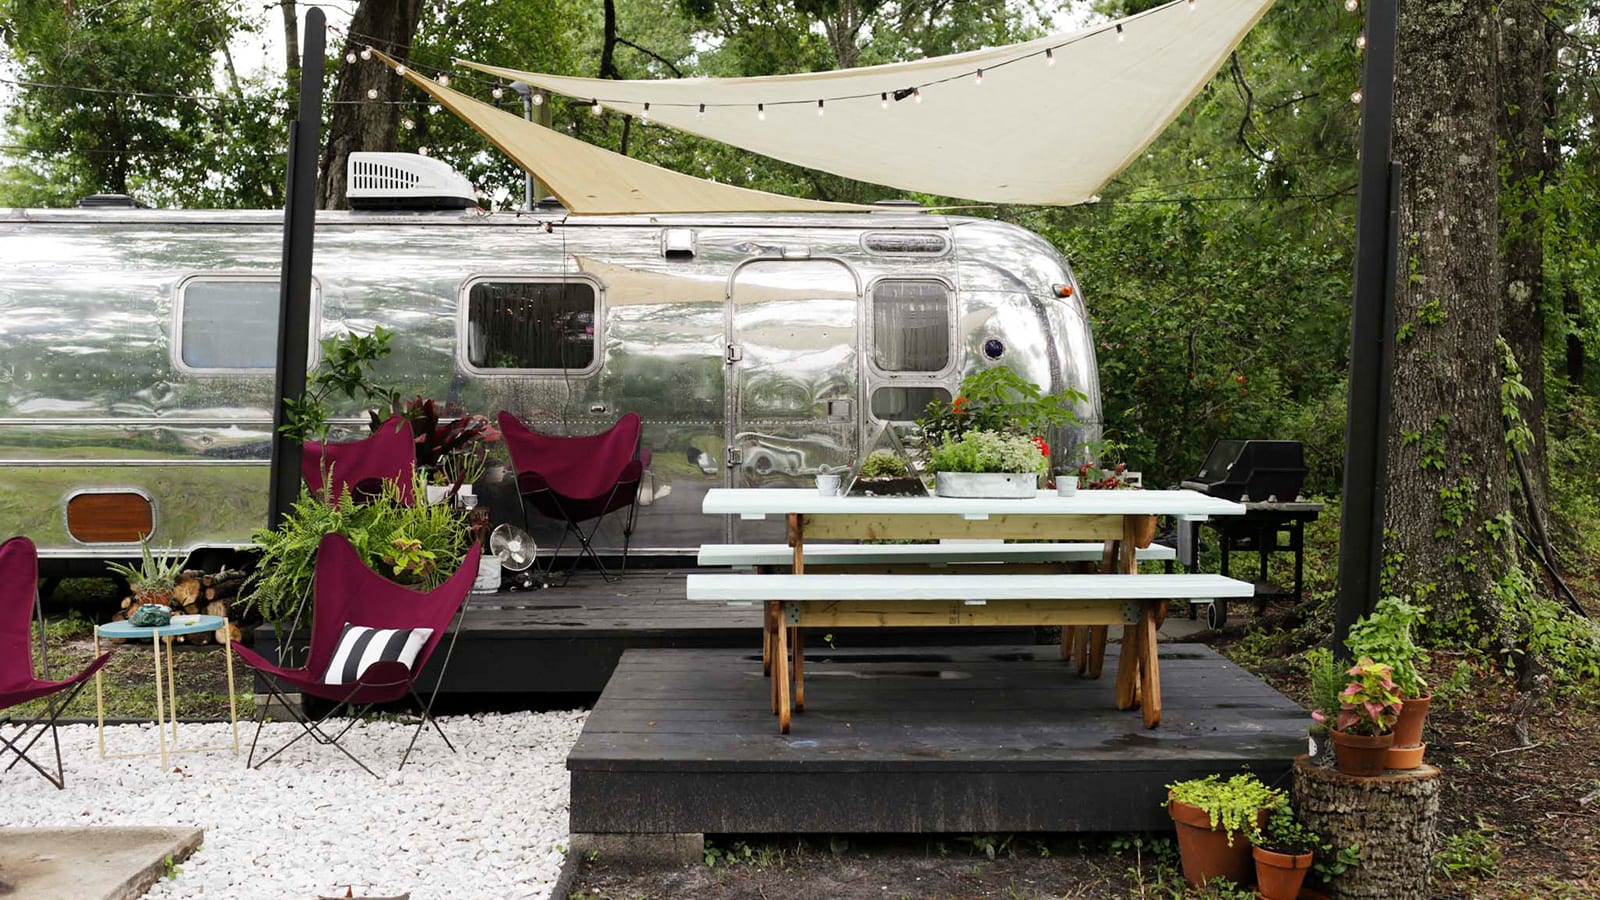 Life on the road .. An American transforms a travel trailer into stylish mobile homes 